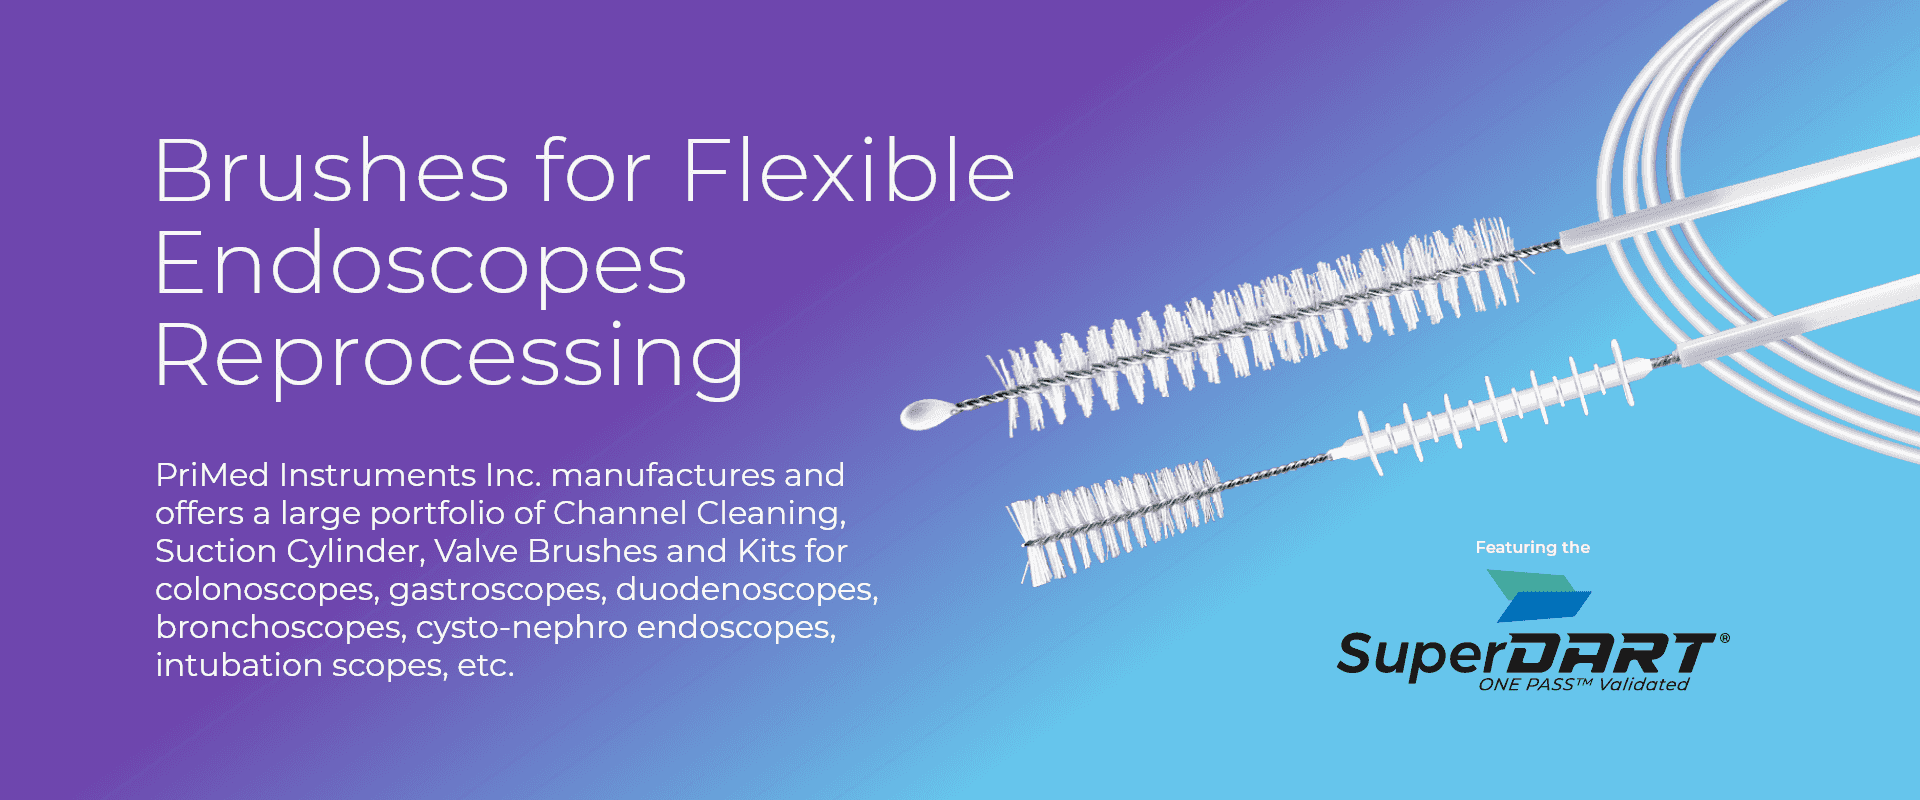 Brushes for Flexible Endoscopes Reprocessing